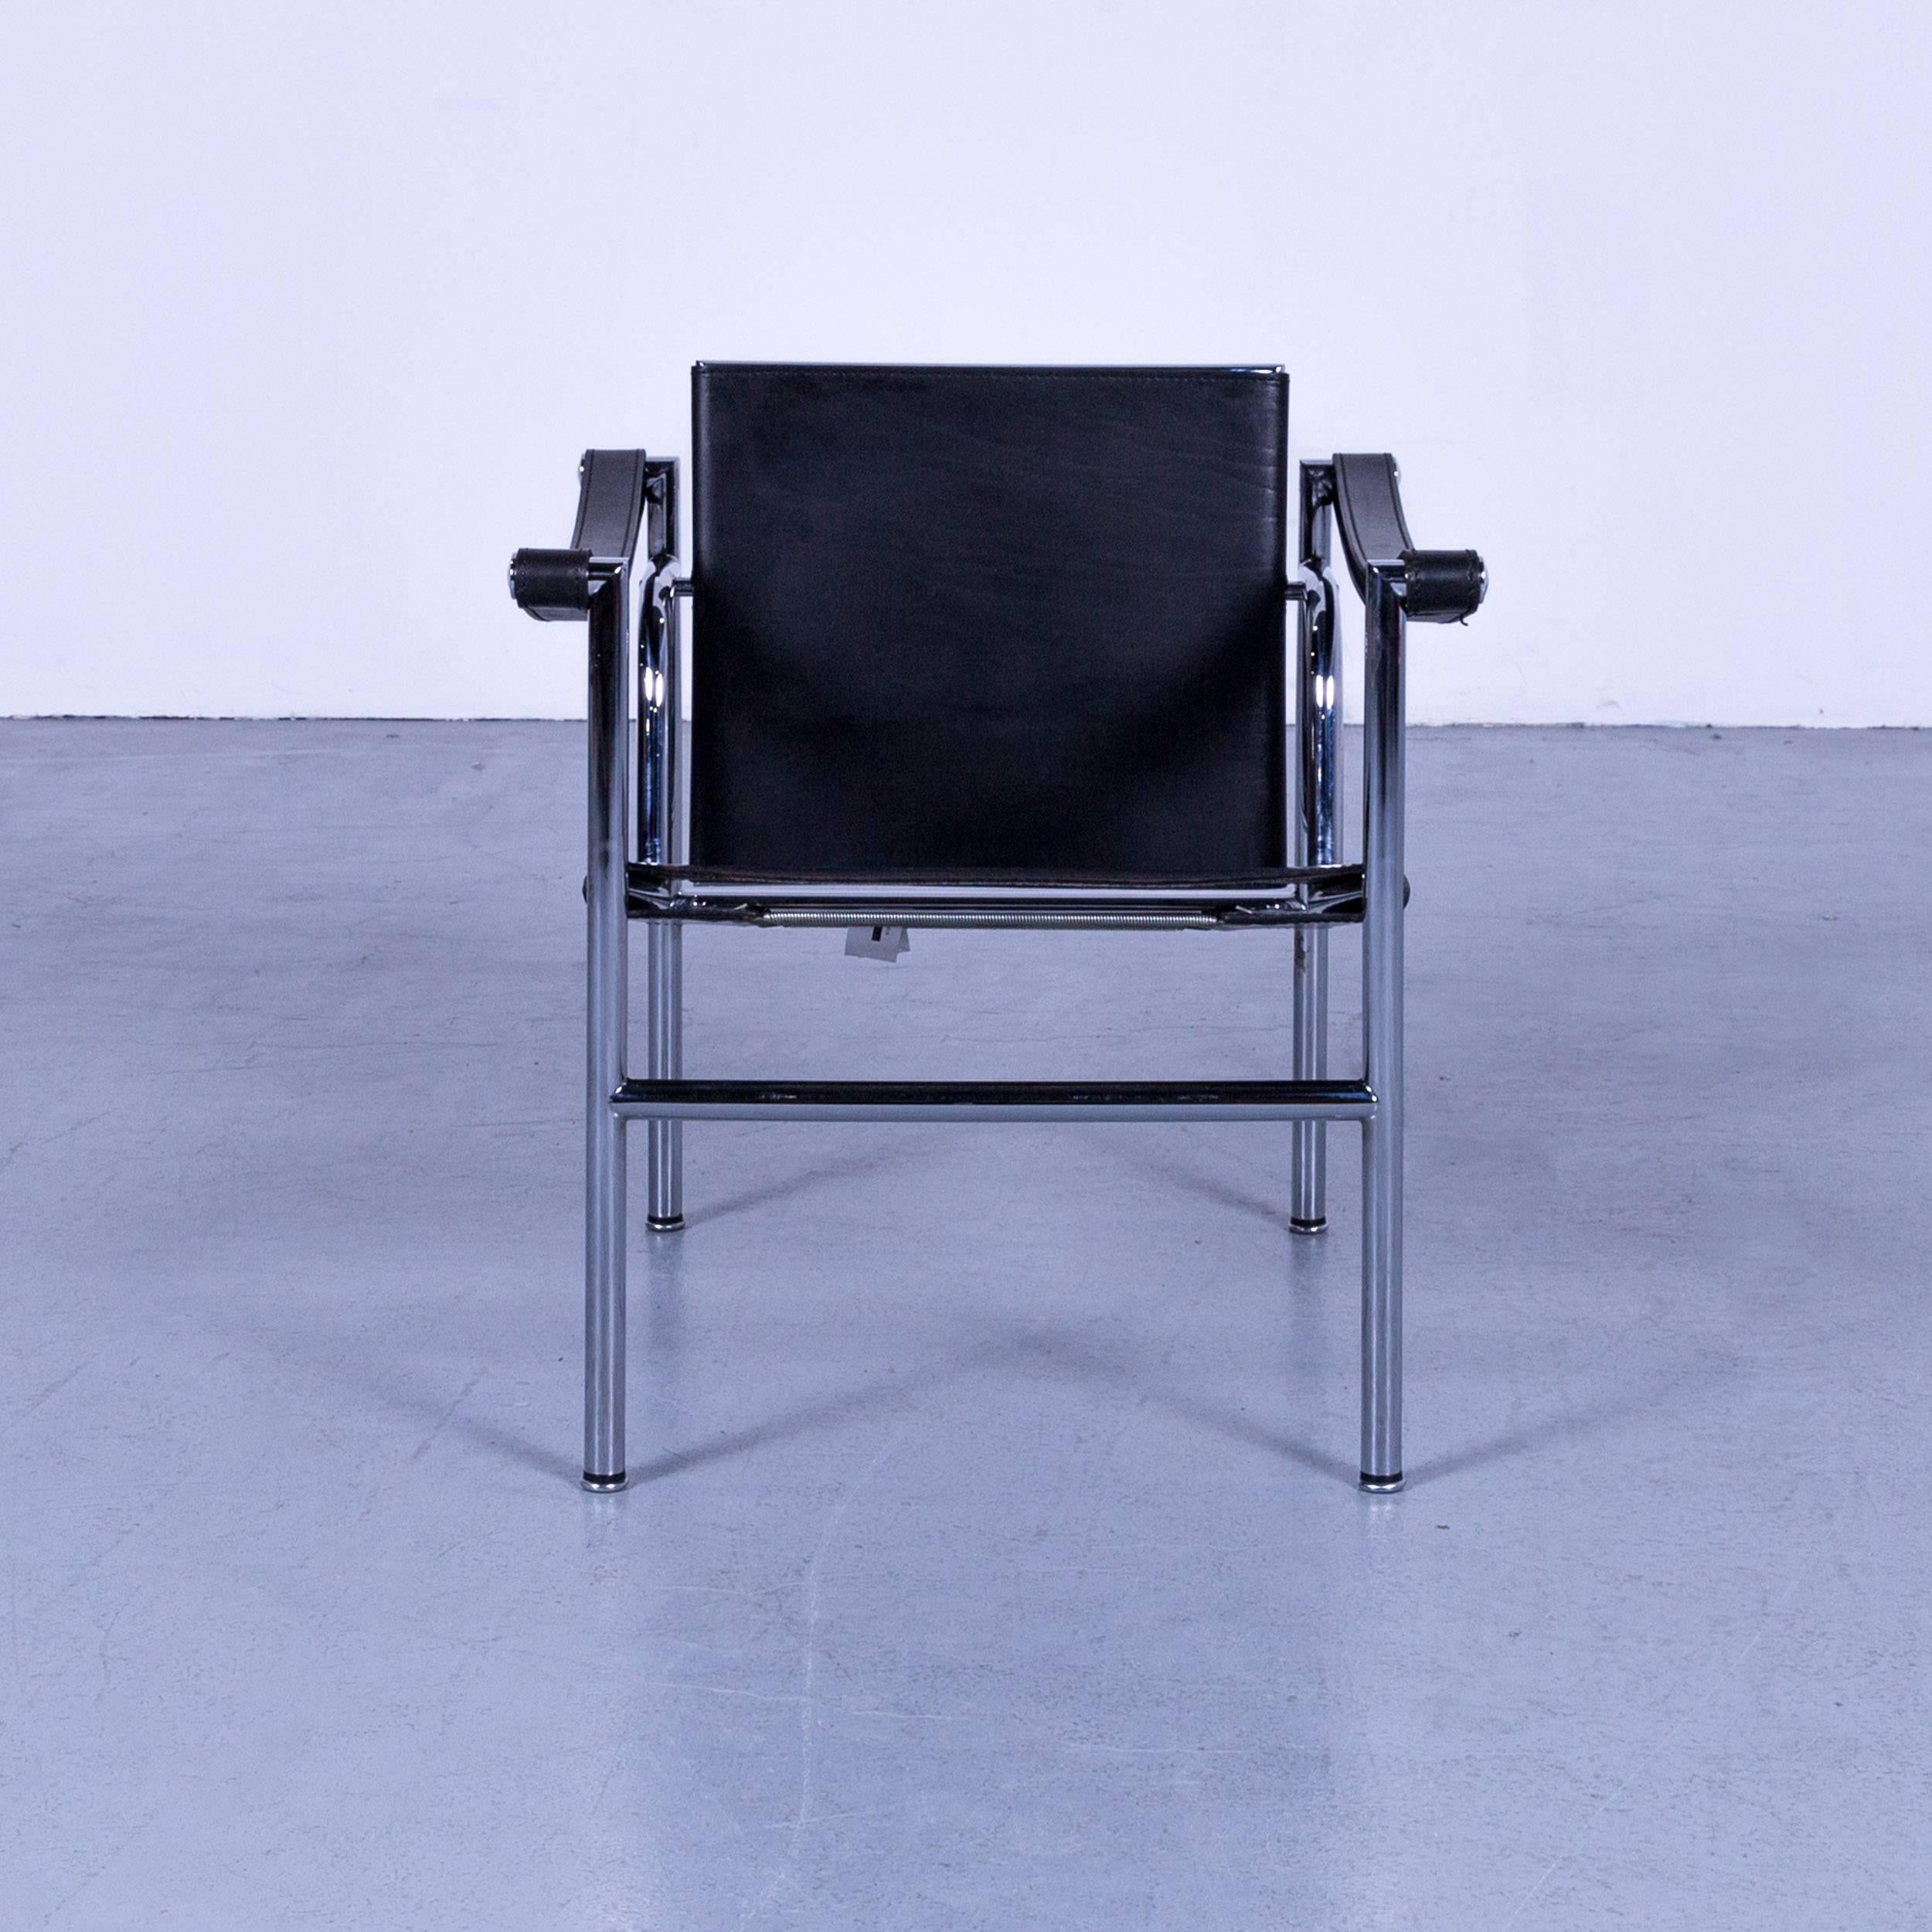 Cassina Le Corbusier LC 1 by Le Corbusier, Jeanneret, Perriand. Sling chair with black leather and polished trivalent chrome-plated (CR3) or semi gloss black enamel steel frame. Classic chair, Bauhaus era.
   